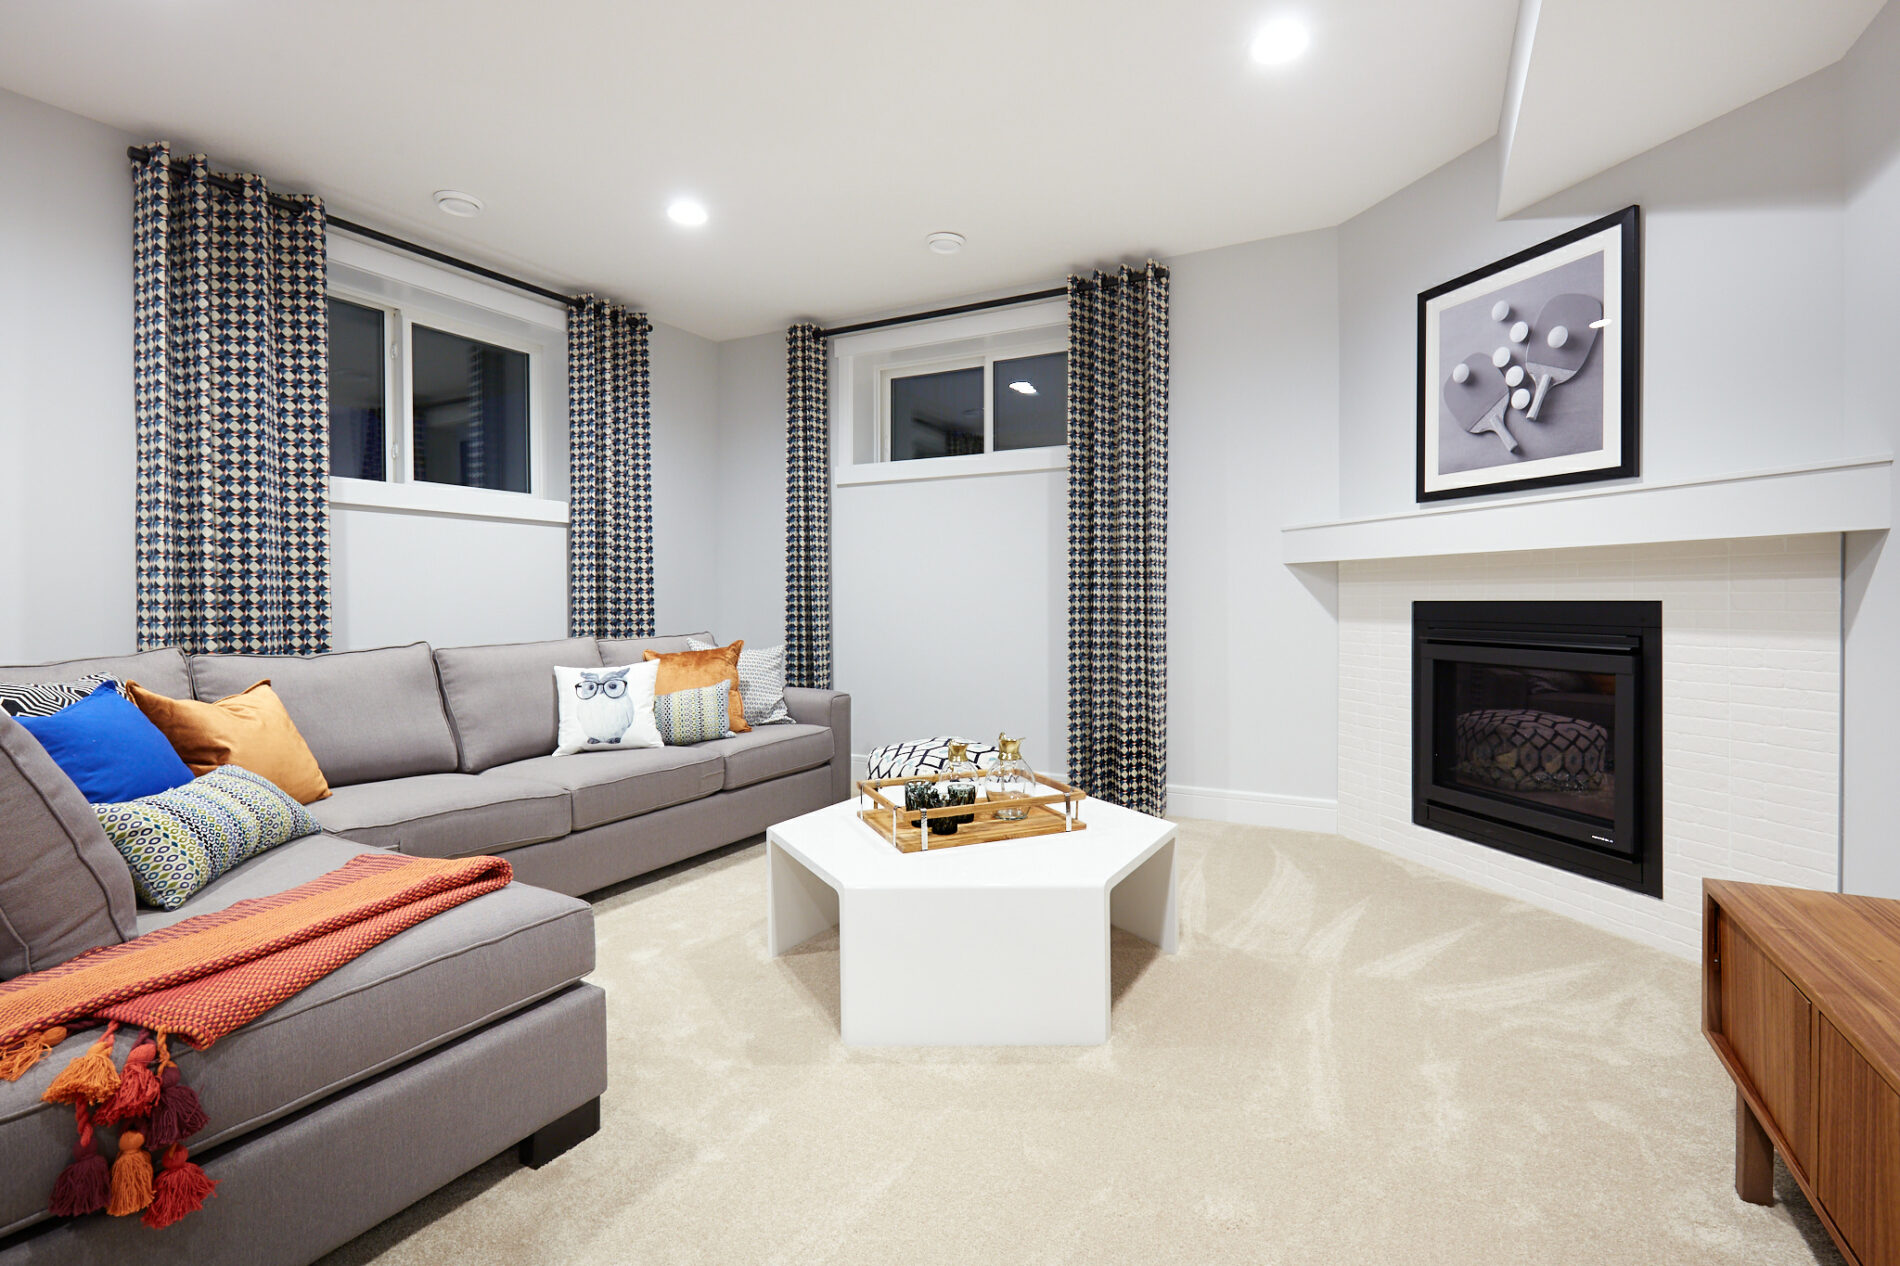 Basement in the Kalliope showhome with corner fireplace and inviting grey sectional couch